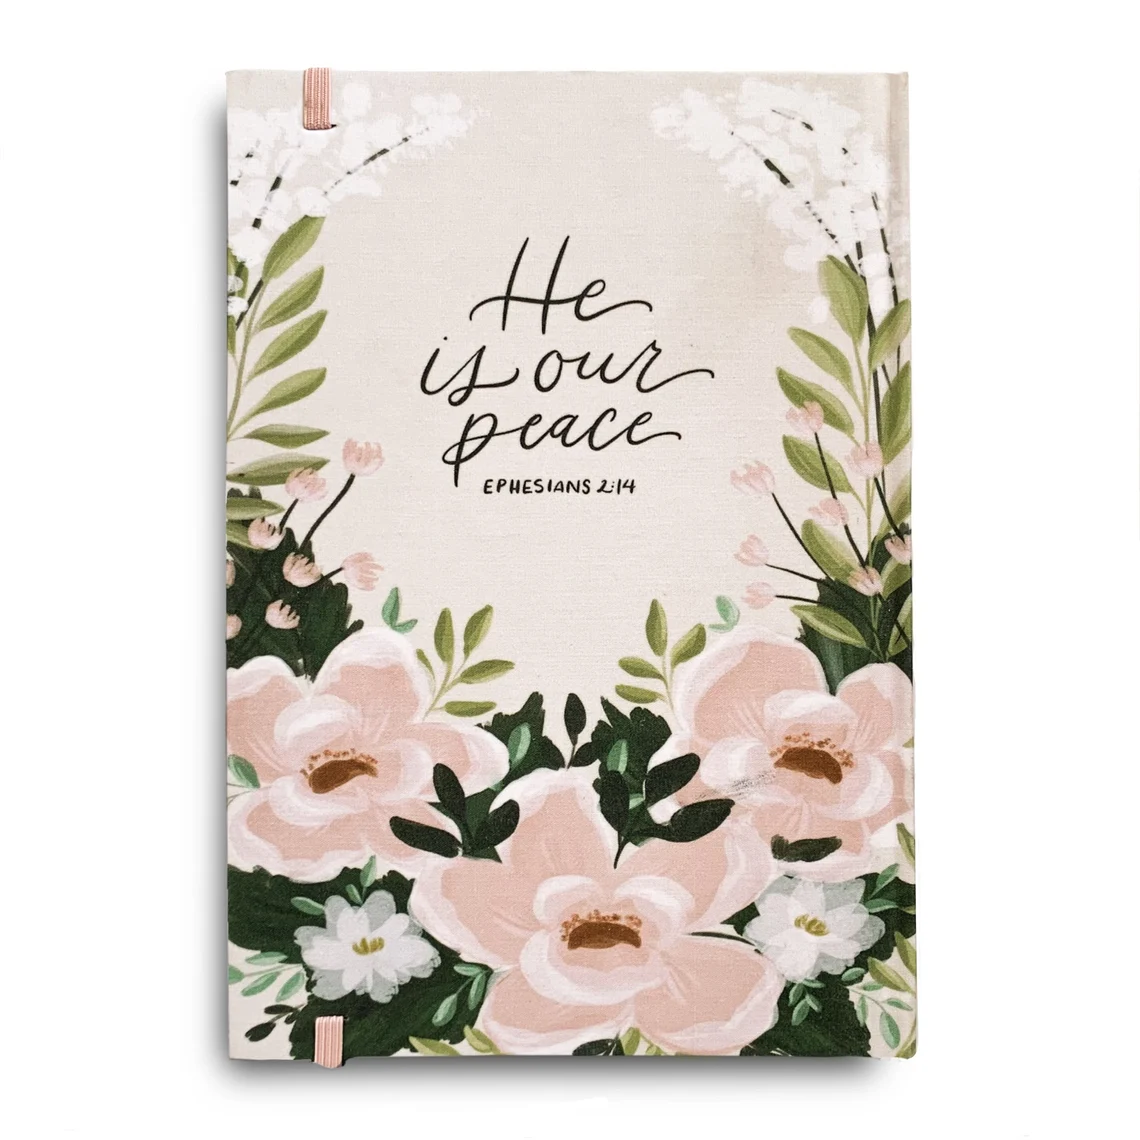 HE IS OUR PEACE Ephesians 2:14 Amelia themed floral hardback journal from LoveAllDesignCo on Etsy. #christianjournals #ephesians2